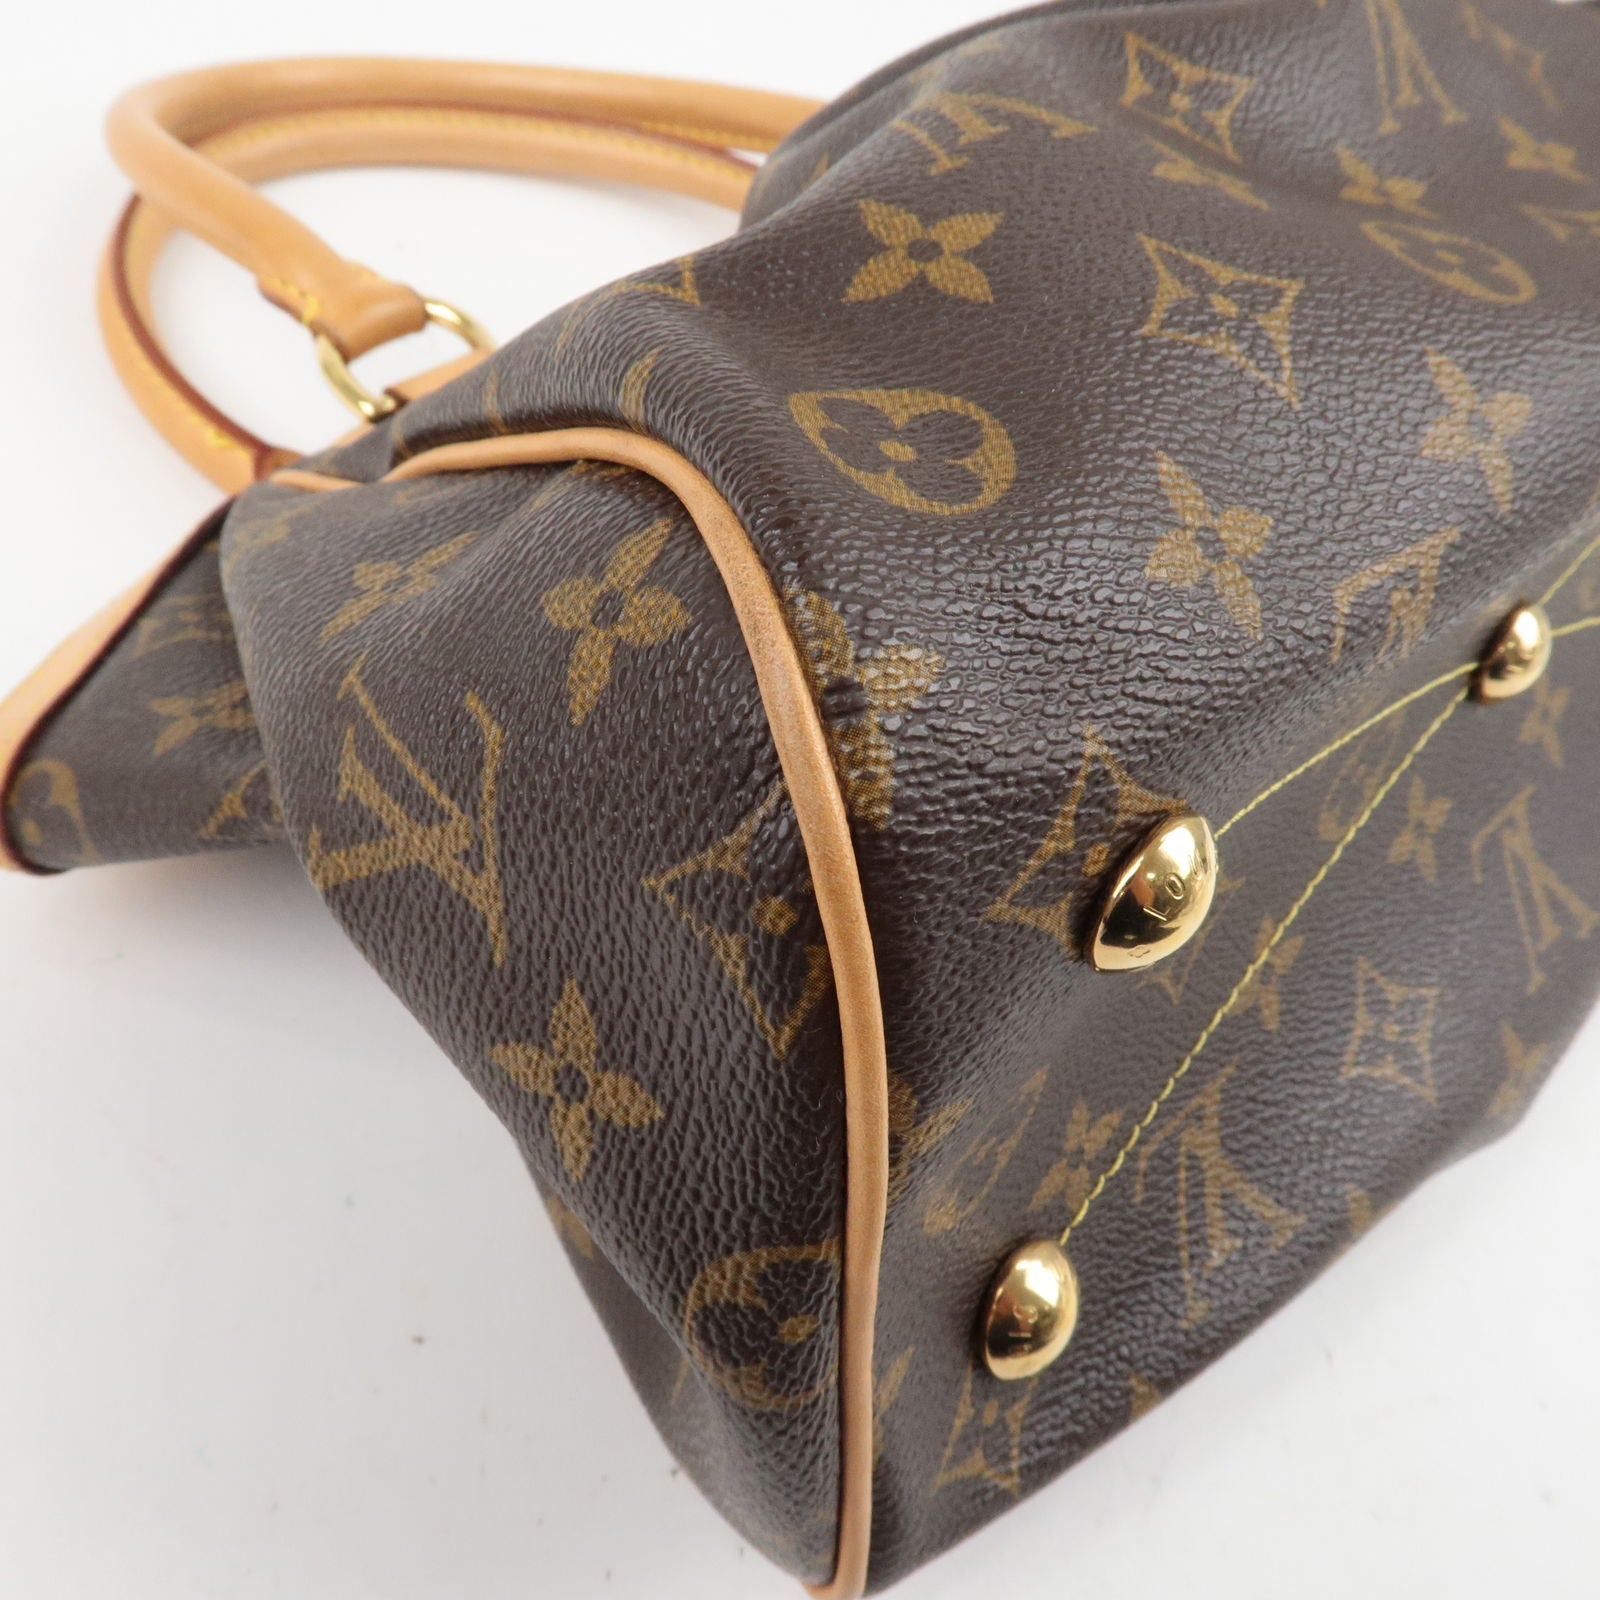 New Vintage x Louis Vuitton Makeup Bag 28 with Hand-Painted Initial S —  Etc